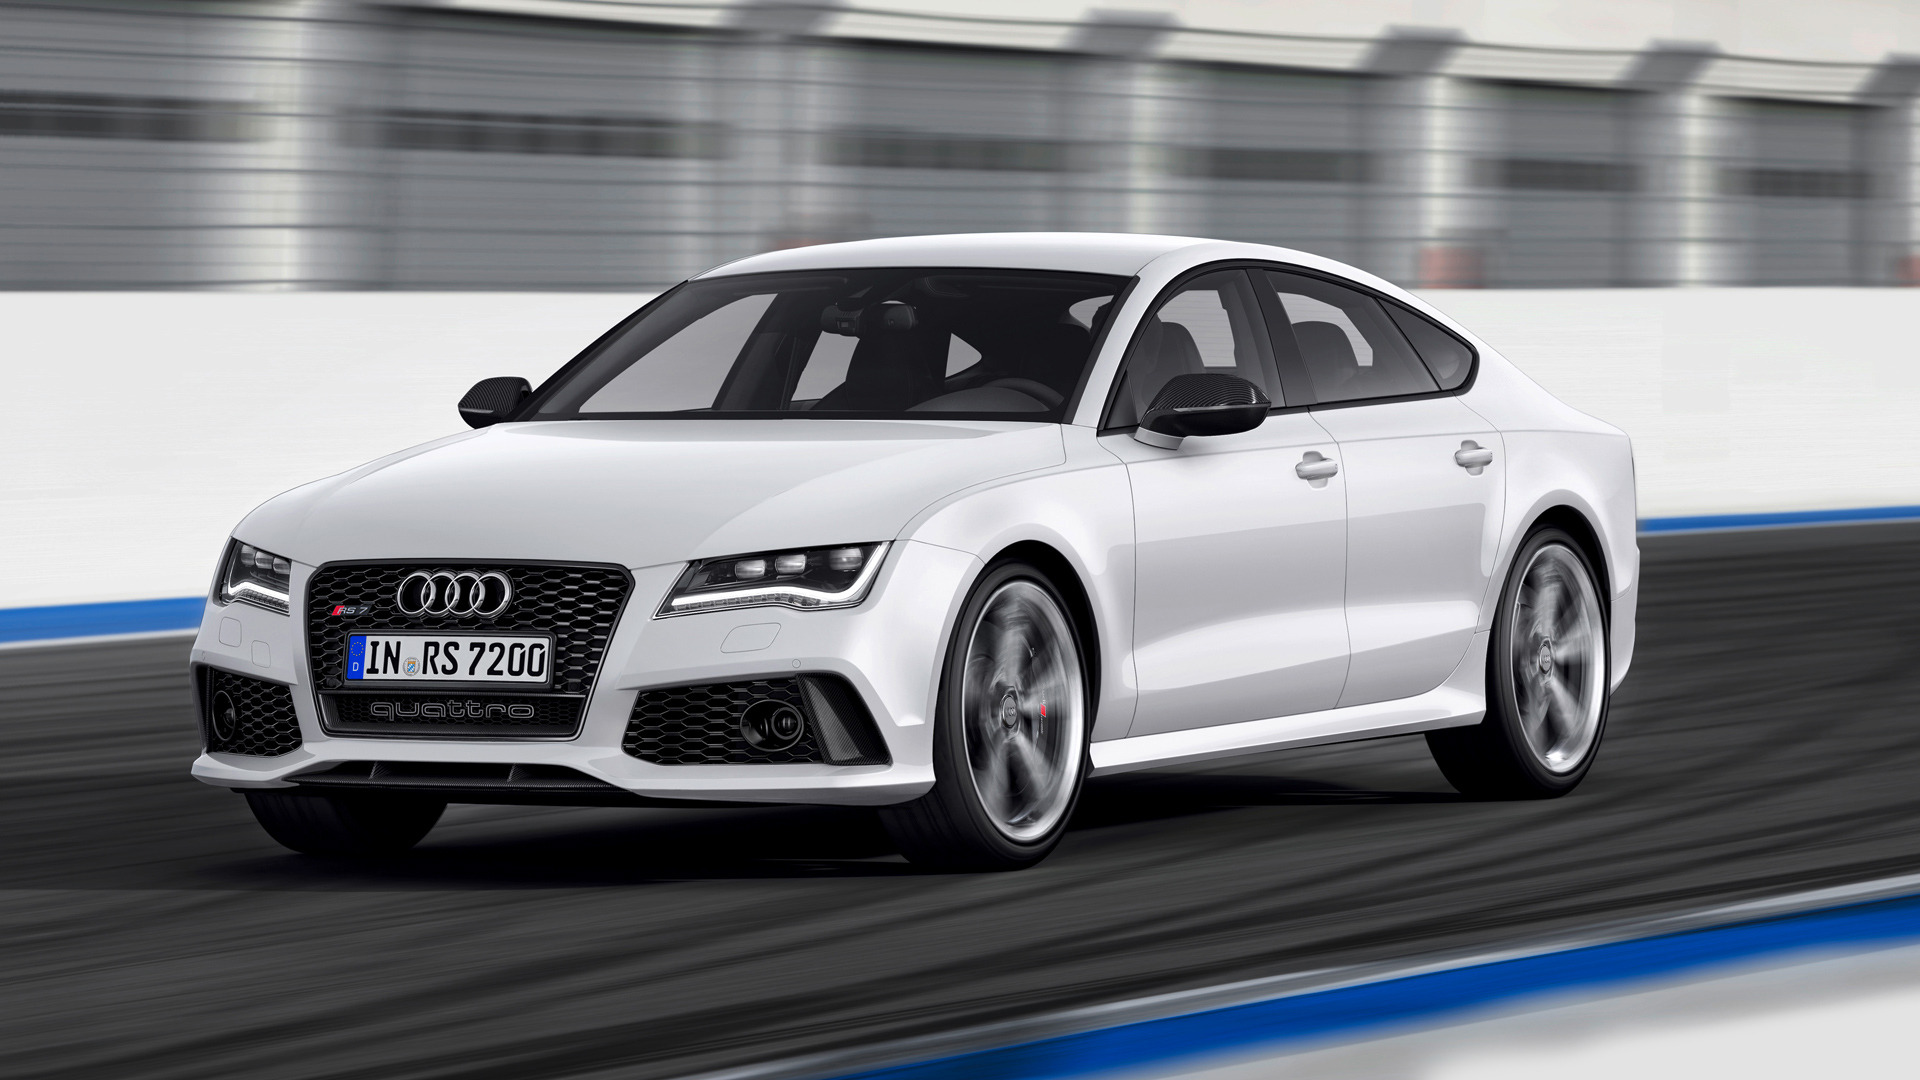 Free download 2014 Audi Rs7 Luxury HD Wallpaper Cars Wallpapers [1920x1080]  for your Desktop, Mobile & Tablet | Explore 91+ Audi Wallpapers | HD Audi  Wallpapers, Audi Wallpaper HD, Audi A8 Wallpaper